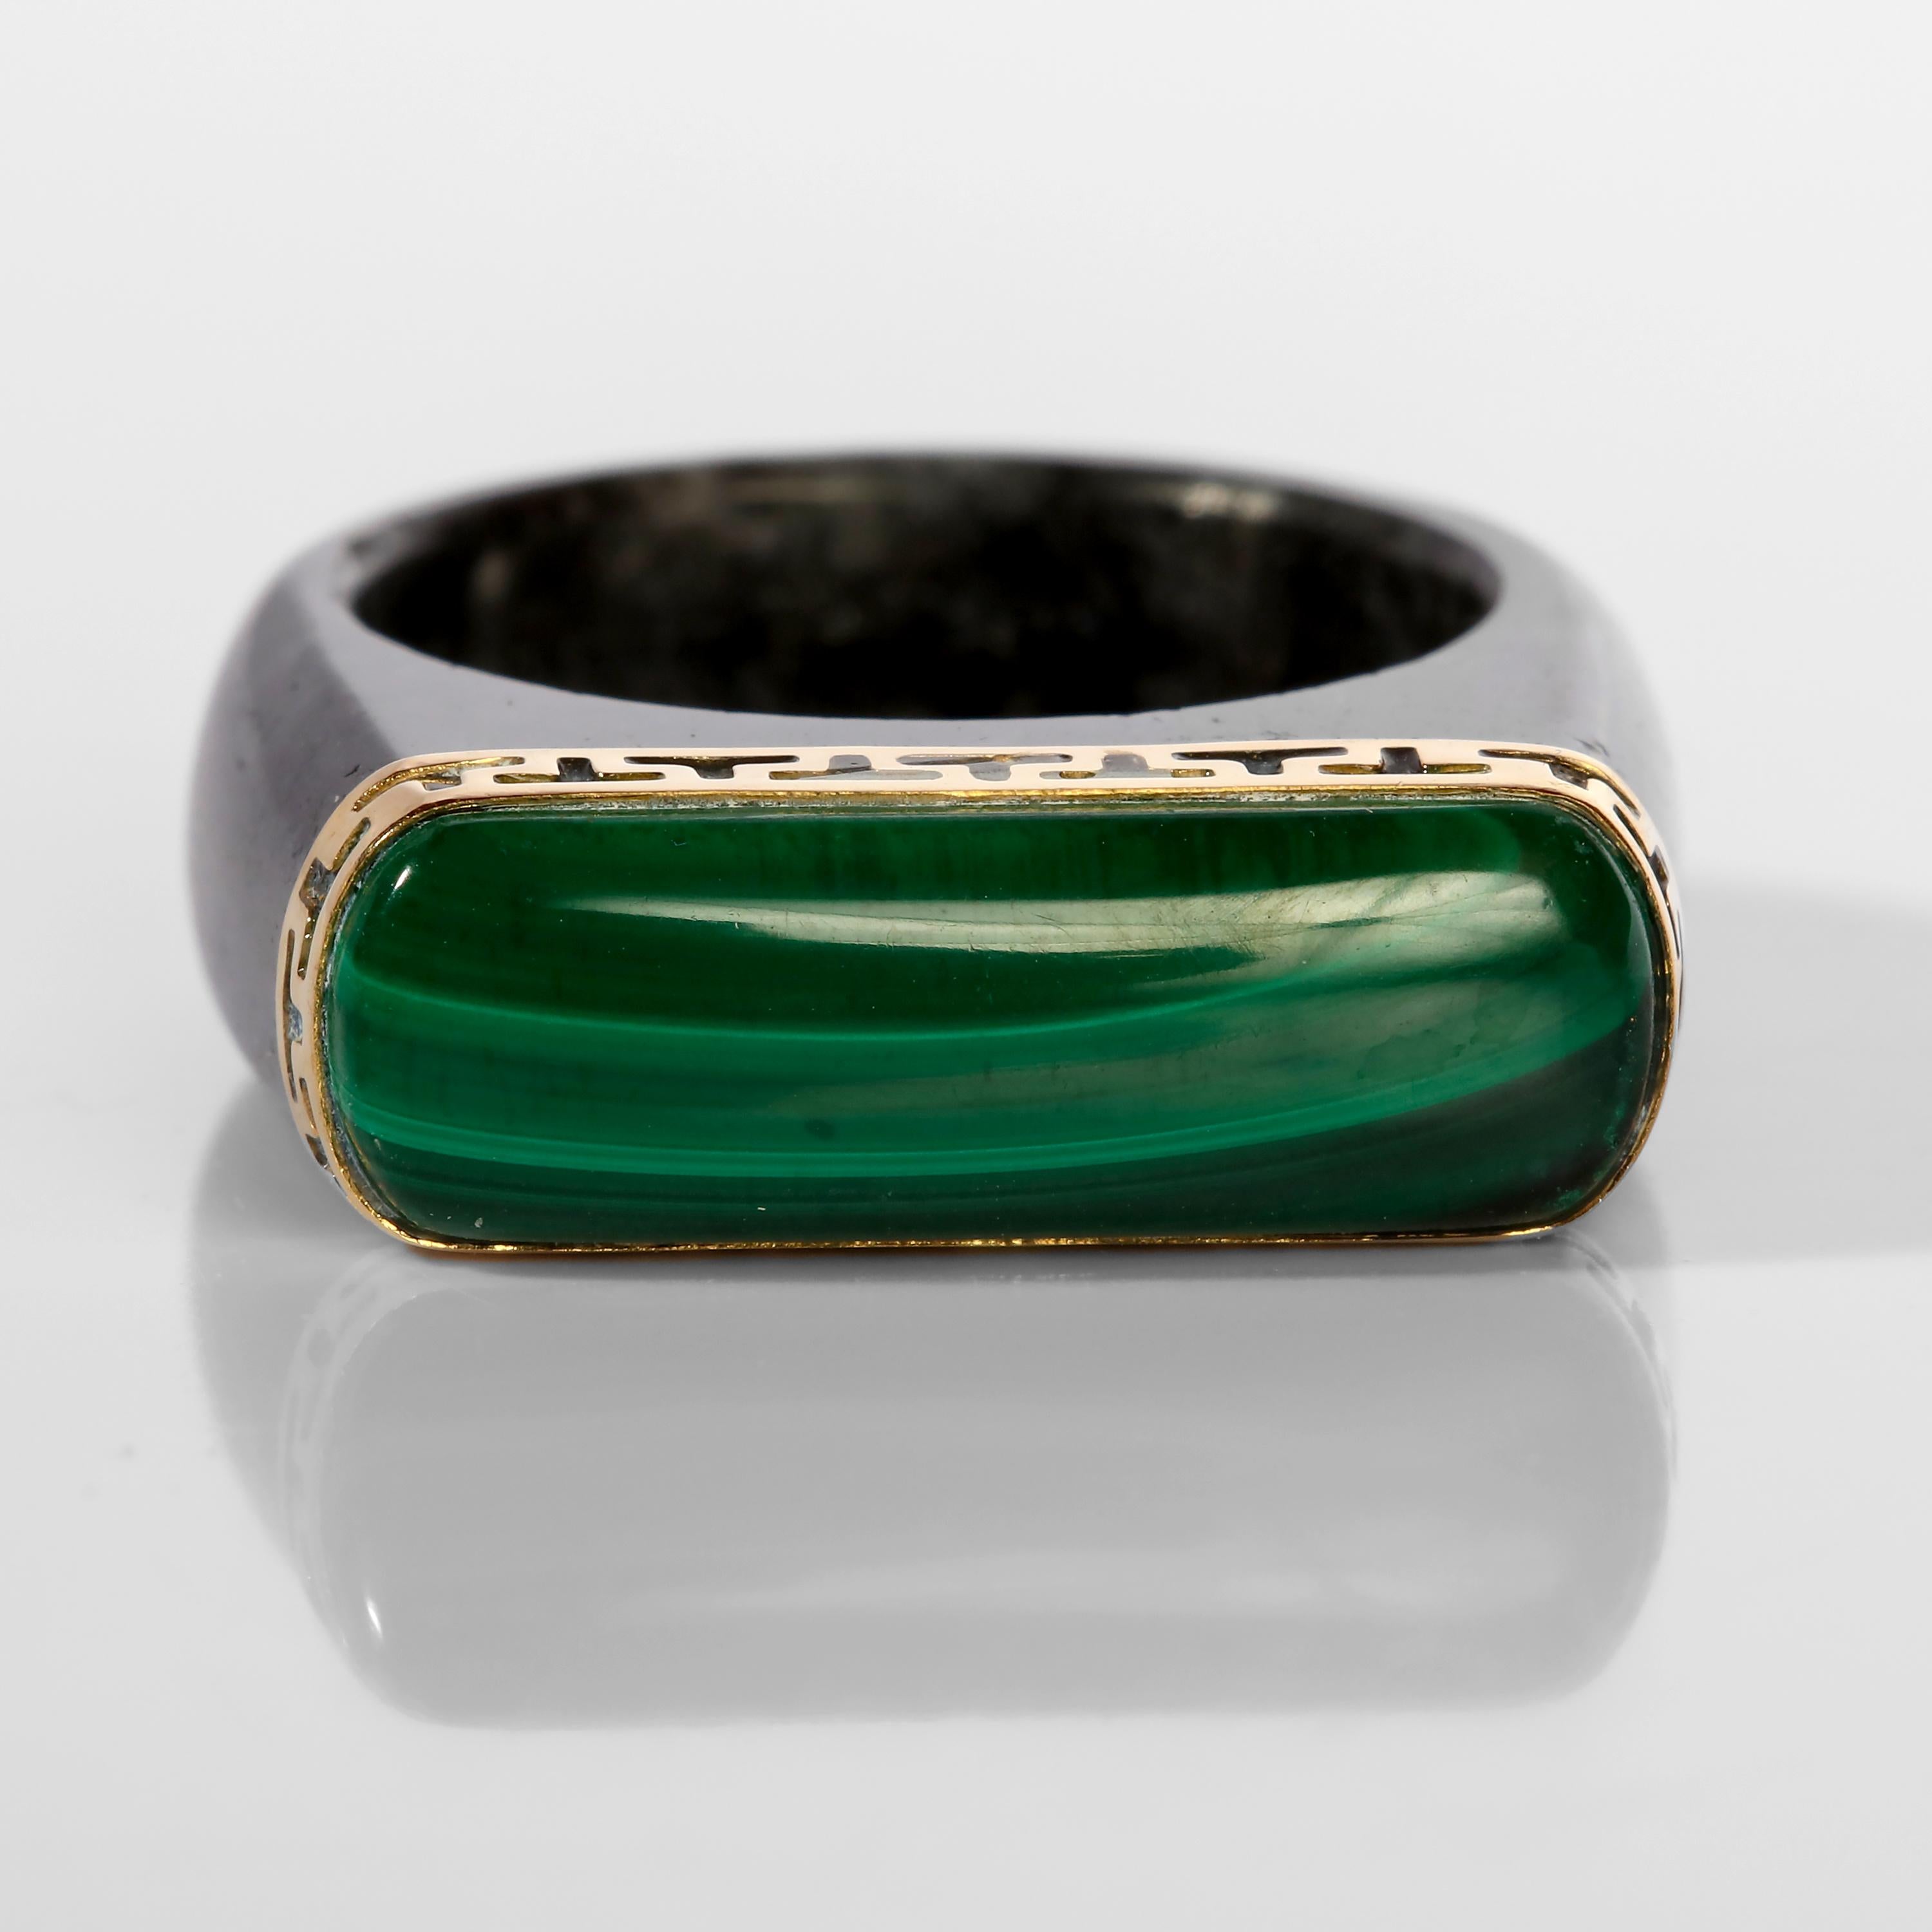 Here's a ring you don't come across every day or every other day or ever. A hand-carved natural and untreated black jadeite jade ring that is capped with a 14K yellow gold bezel featuring a pierced geometric design that resembles the letter 